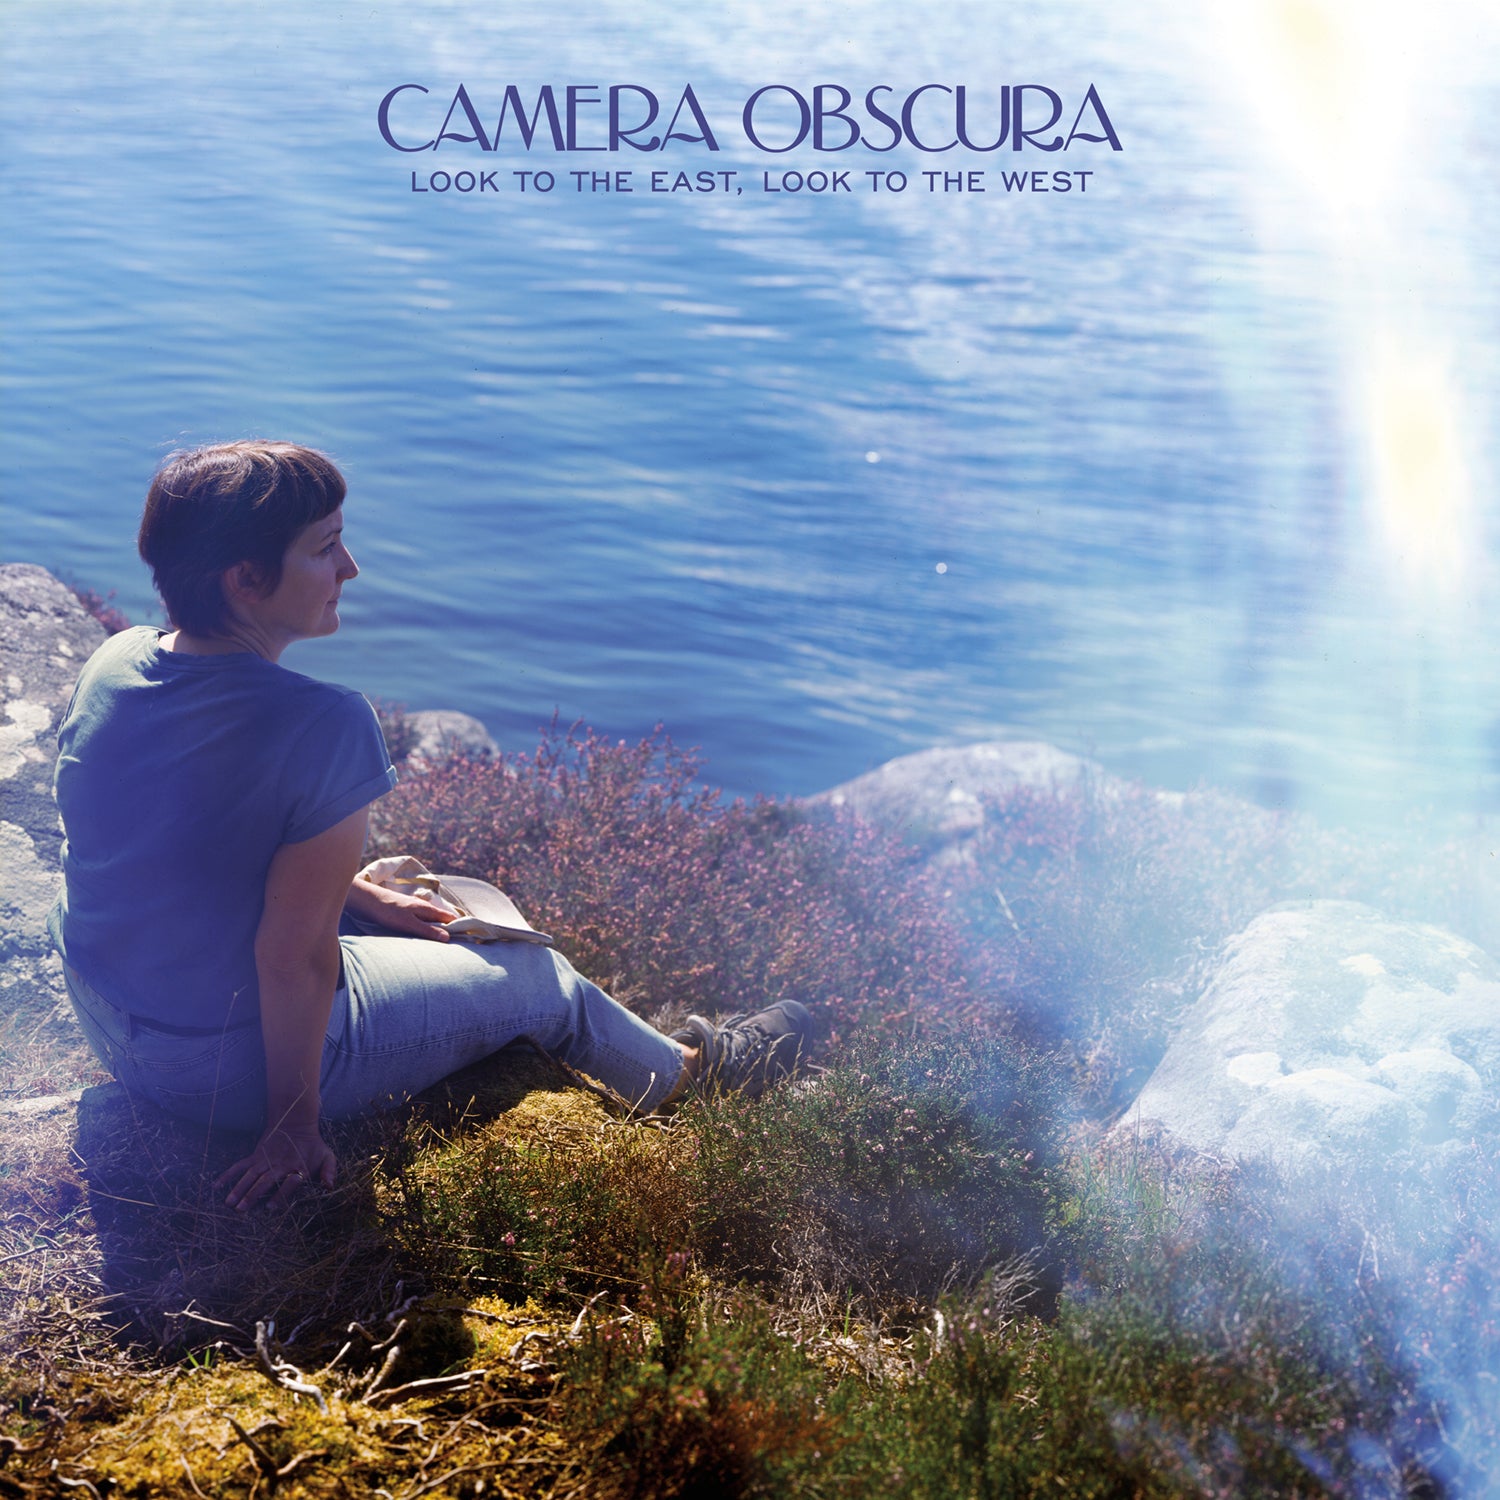 CAMERA OBSCURA 'LOOK TO THE WAST, LOOK TO THE WEST'